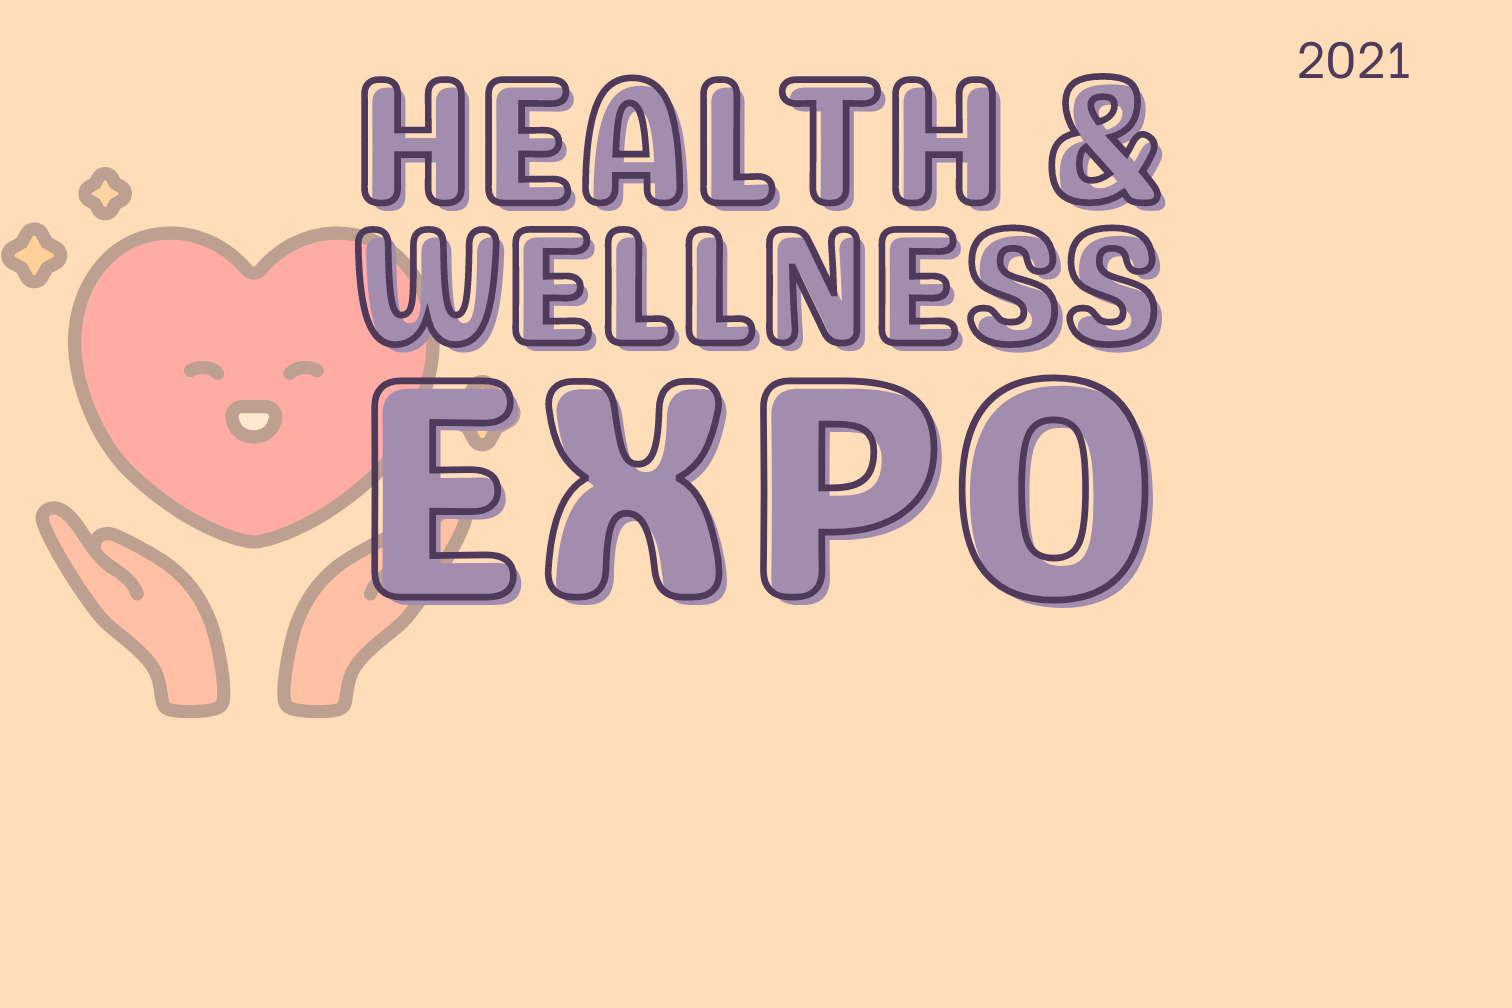 Graphic with tan background reads "Health & Wellness Expo 2021" with a faded image of hands holding a smiling heart and the Rowan Campus Rec logo.